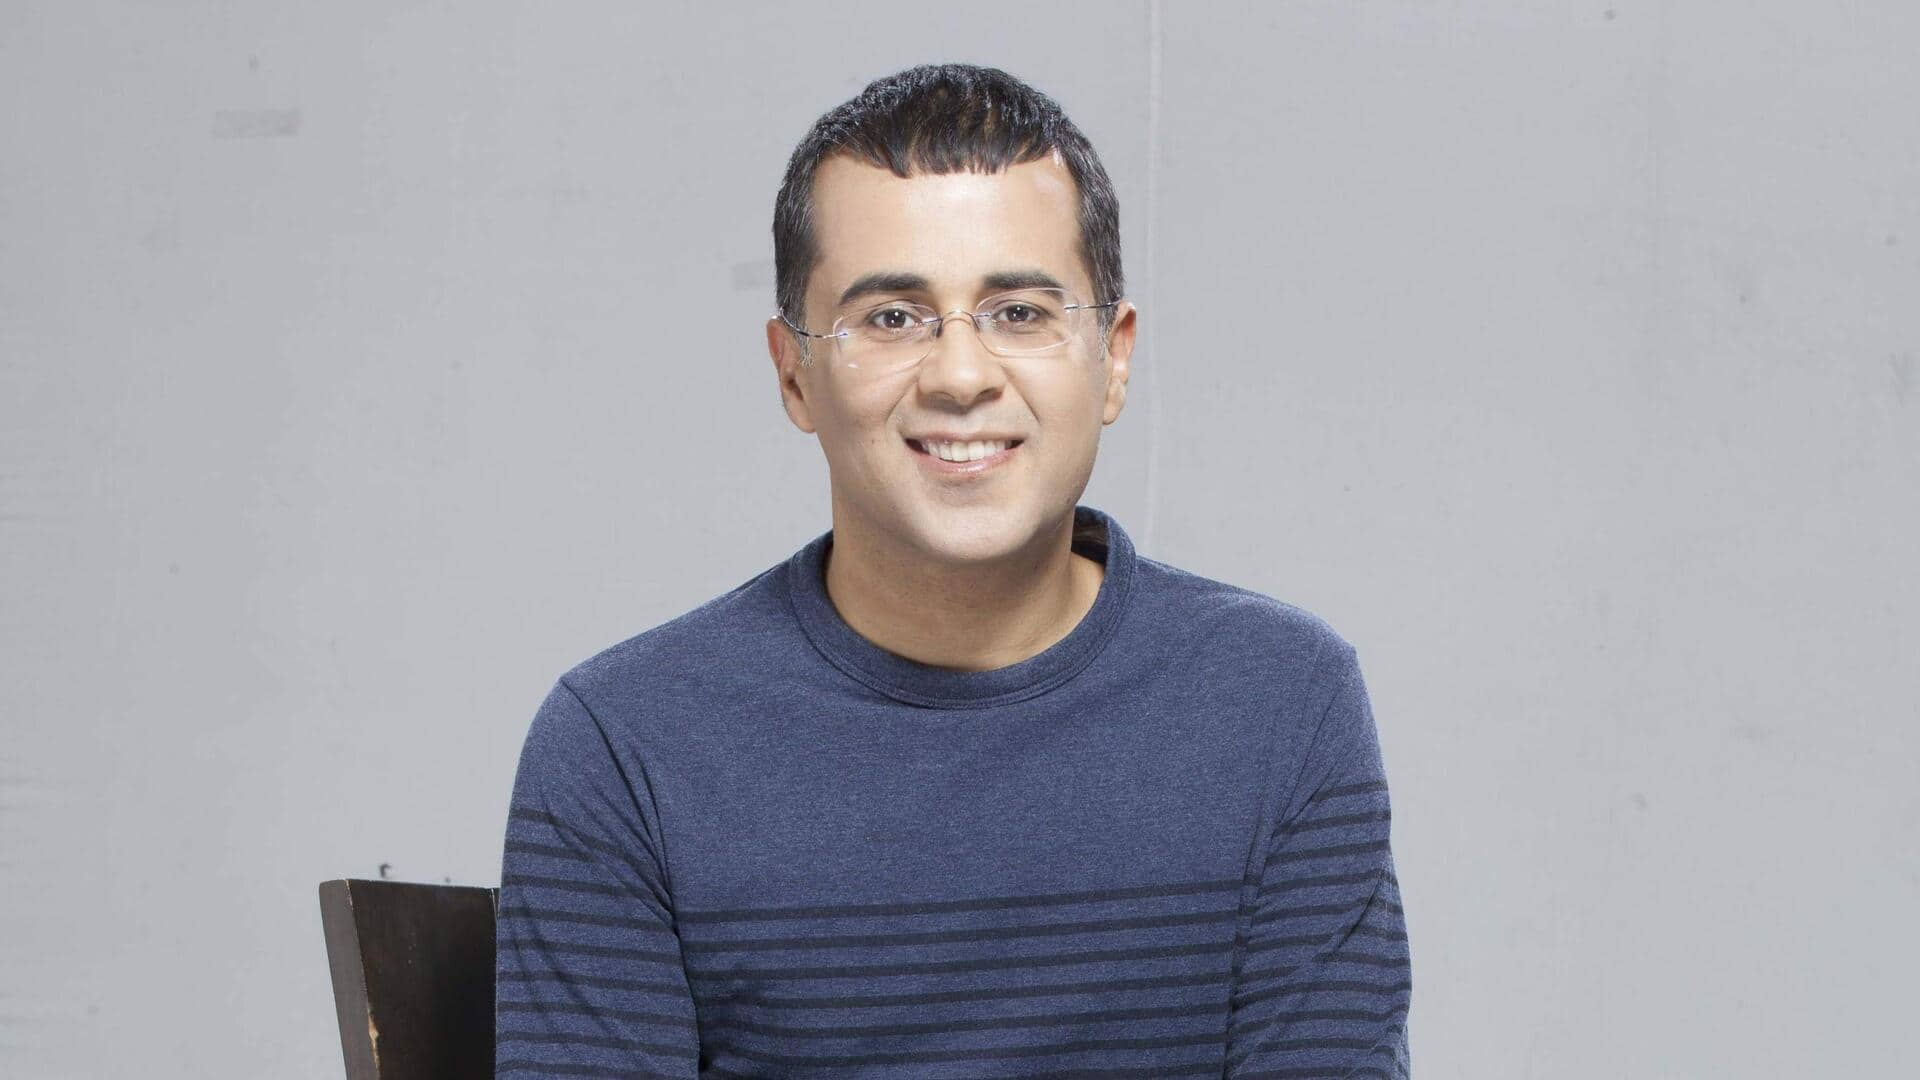 Read these underrated books by Chetan Bhagat